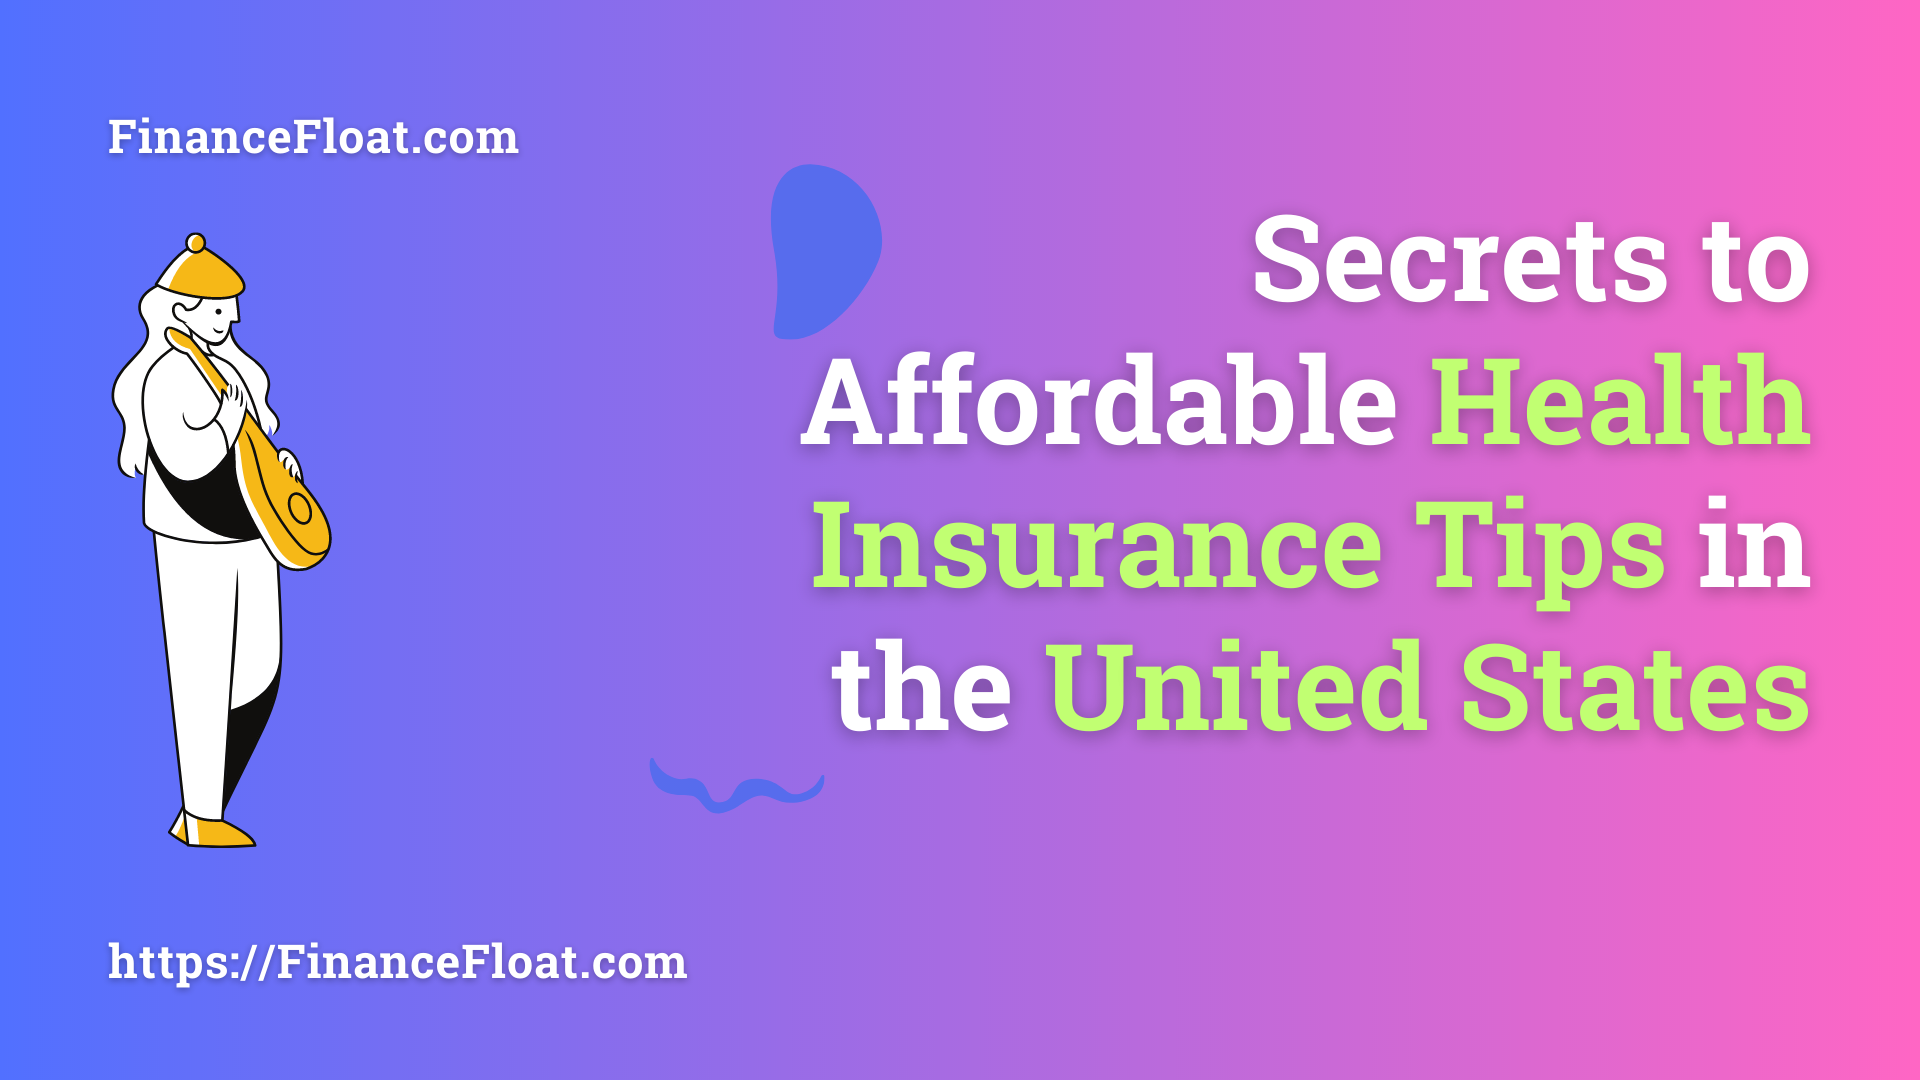 Secrets to Affordable Health Insurance Tips in the United States.